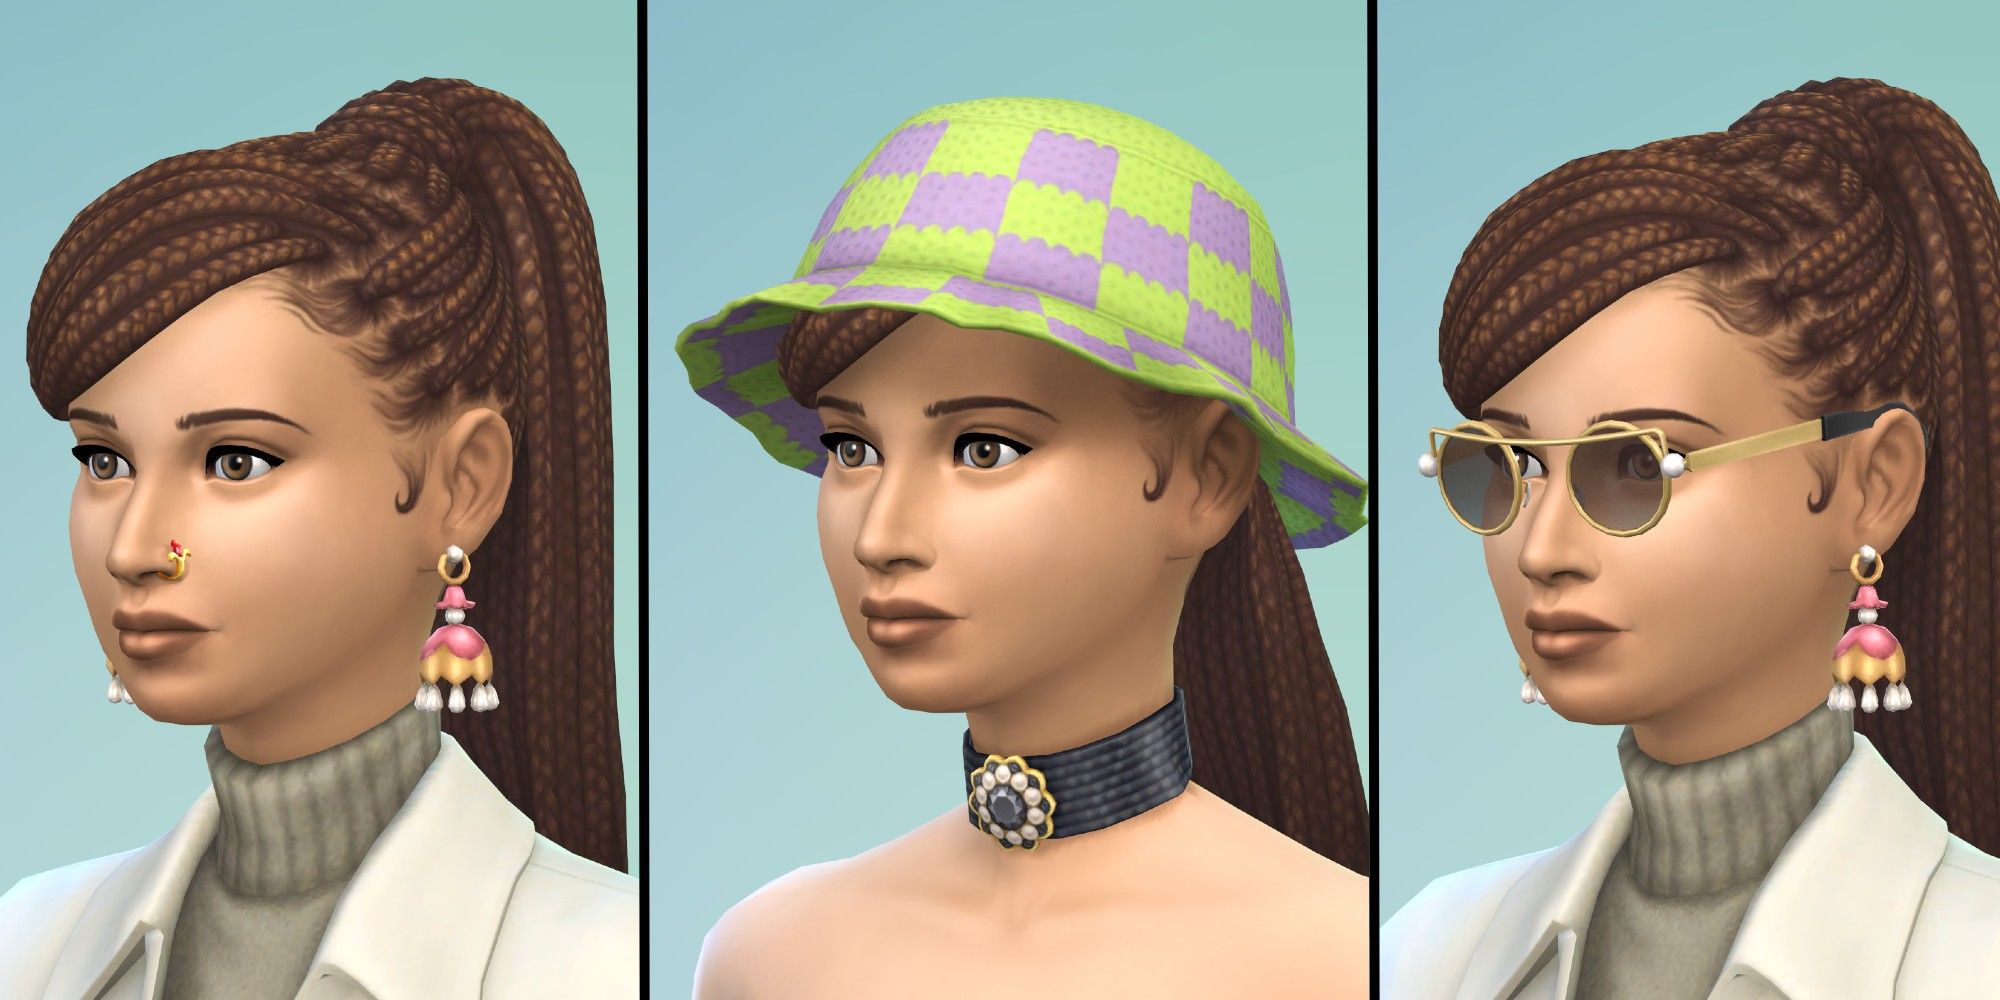 Sims 4: Fashion Steet Kit, Hand Nosering, Choker, Glasses & Earring with default swatches, in the CAS Screen